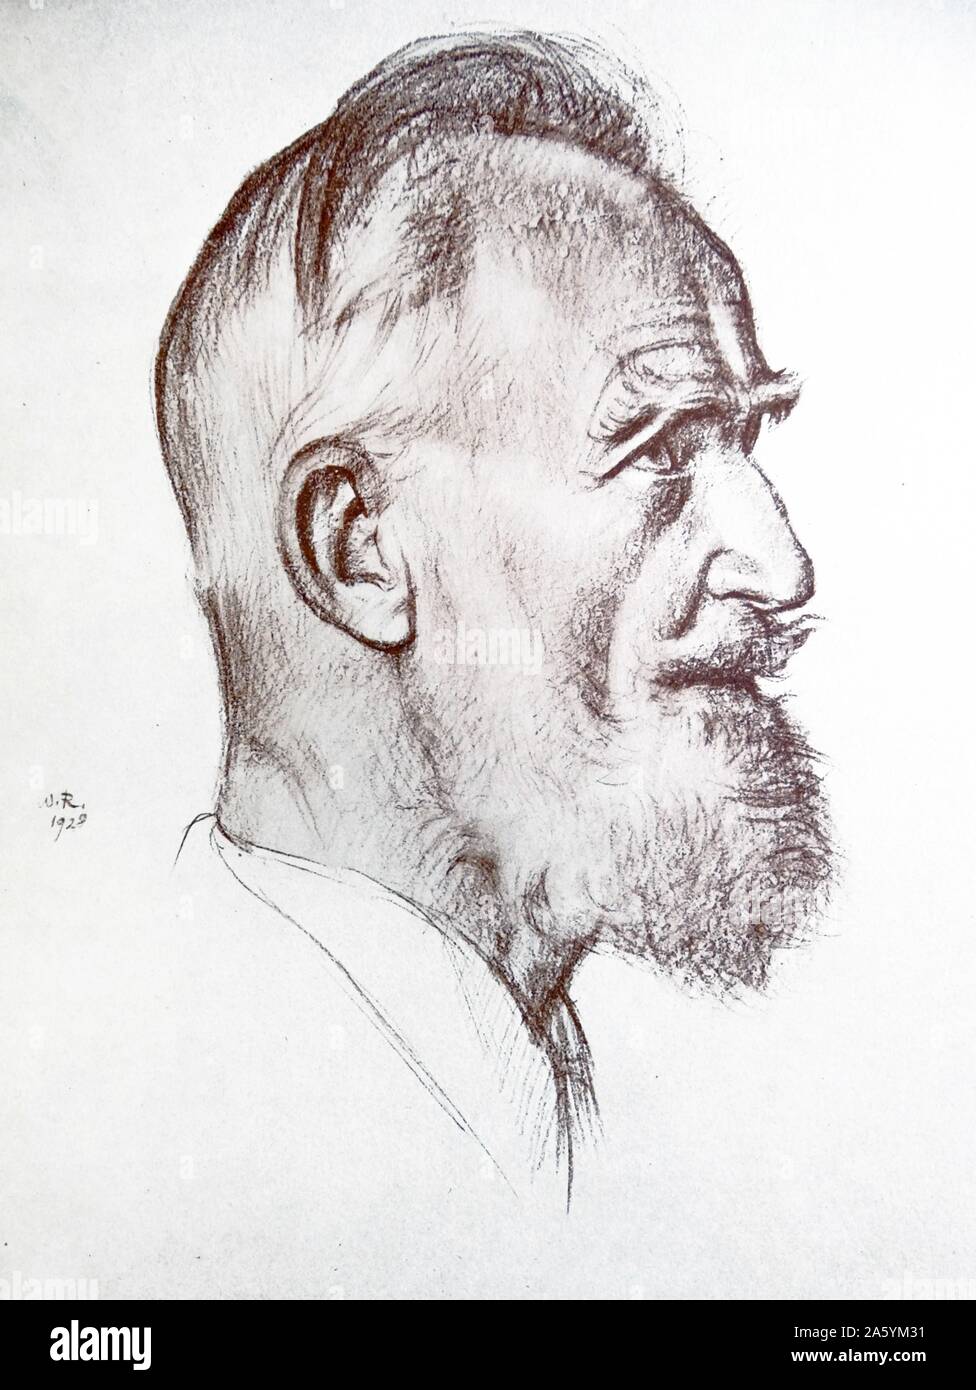 Portrait of George Bernard Shaw by Sir William Rothenstein. Rothenstein (1872-1945) was an English painter, printmaker and draughtsman. Stock Photo